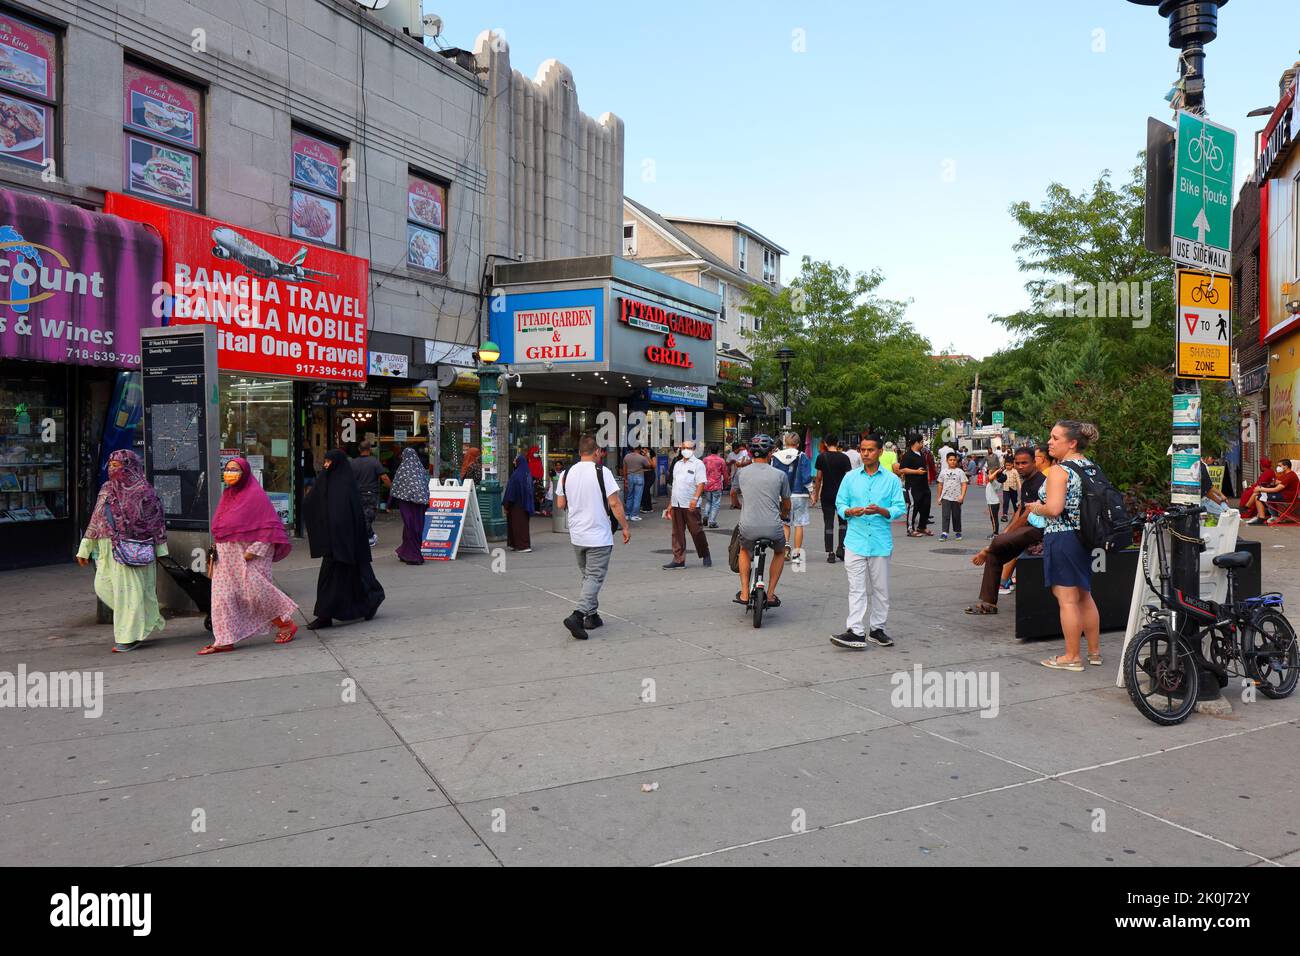 People, shoppers a Diversity Plaza, una piazza pedonale situata a 37th Rd tra 73rd e 74th STS, Jackson Heights, Queens, New York, agosto 30, 20 Foto Stock